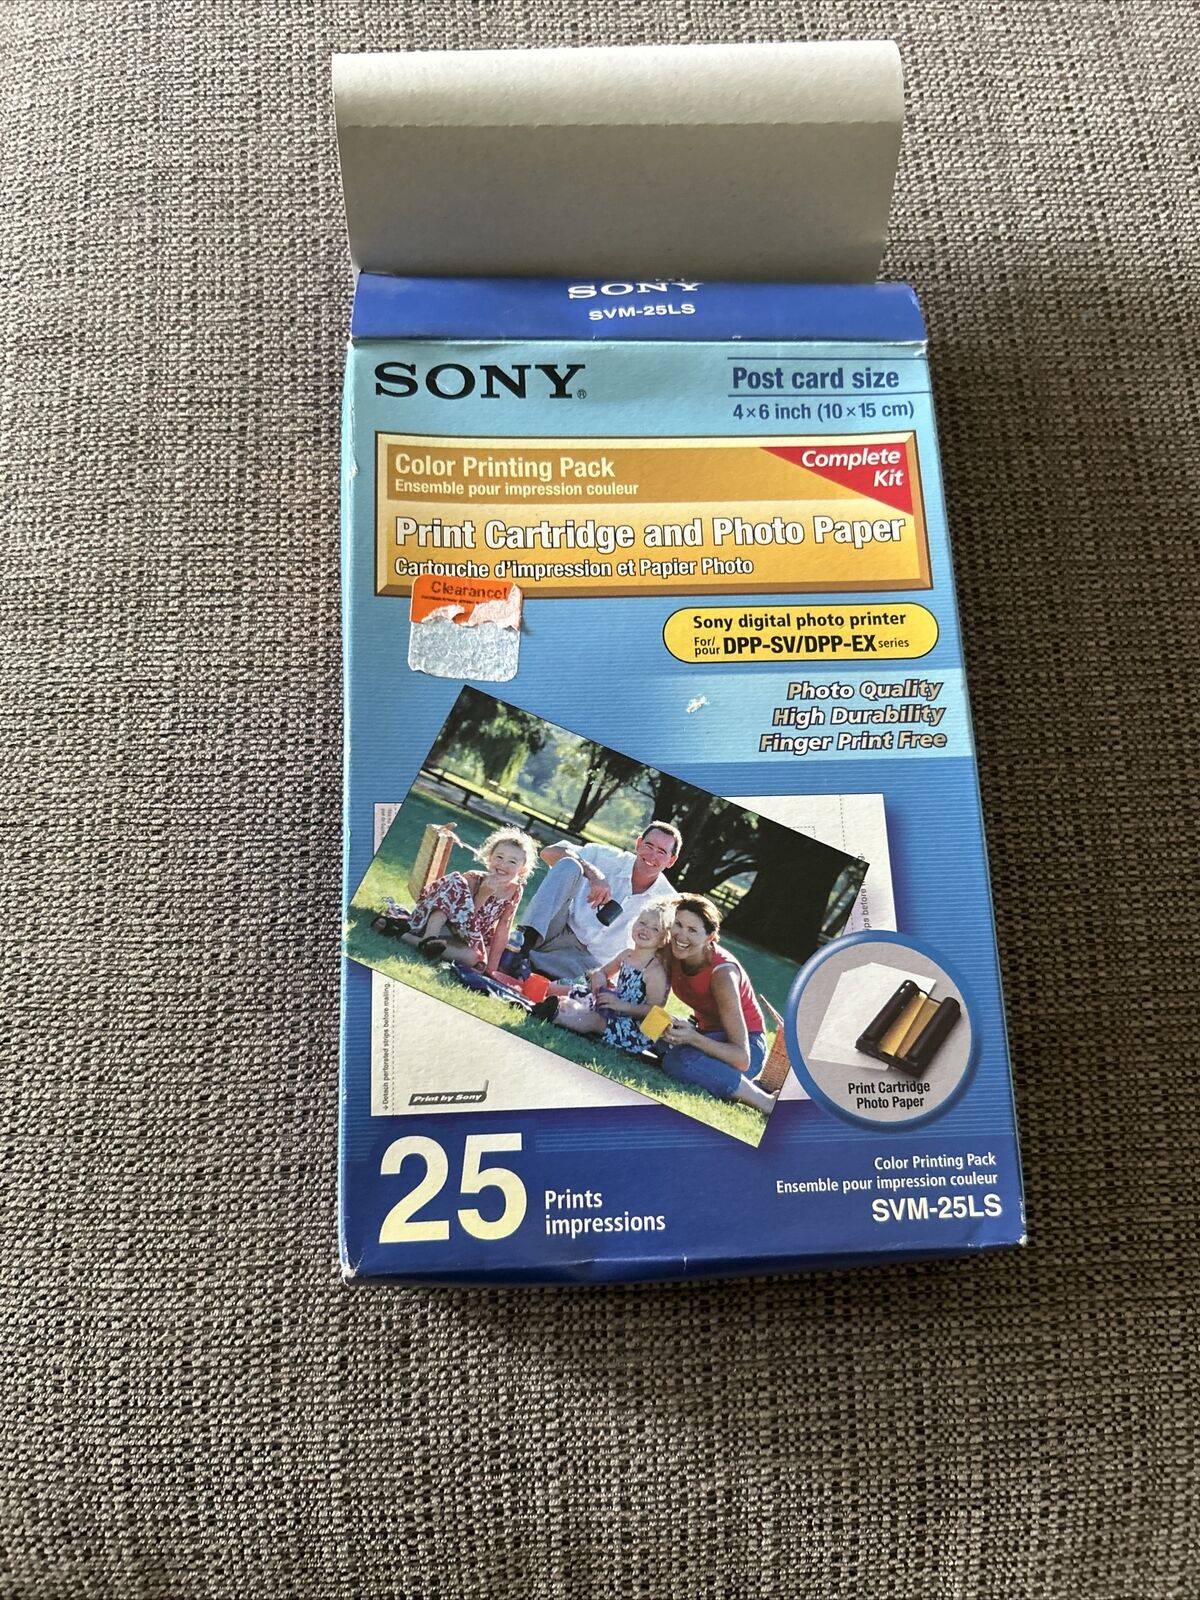 Sony SVM-25LS Print Cartridge And Photo Paper With 25 Prints F2